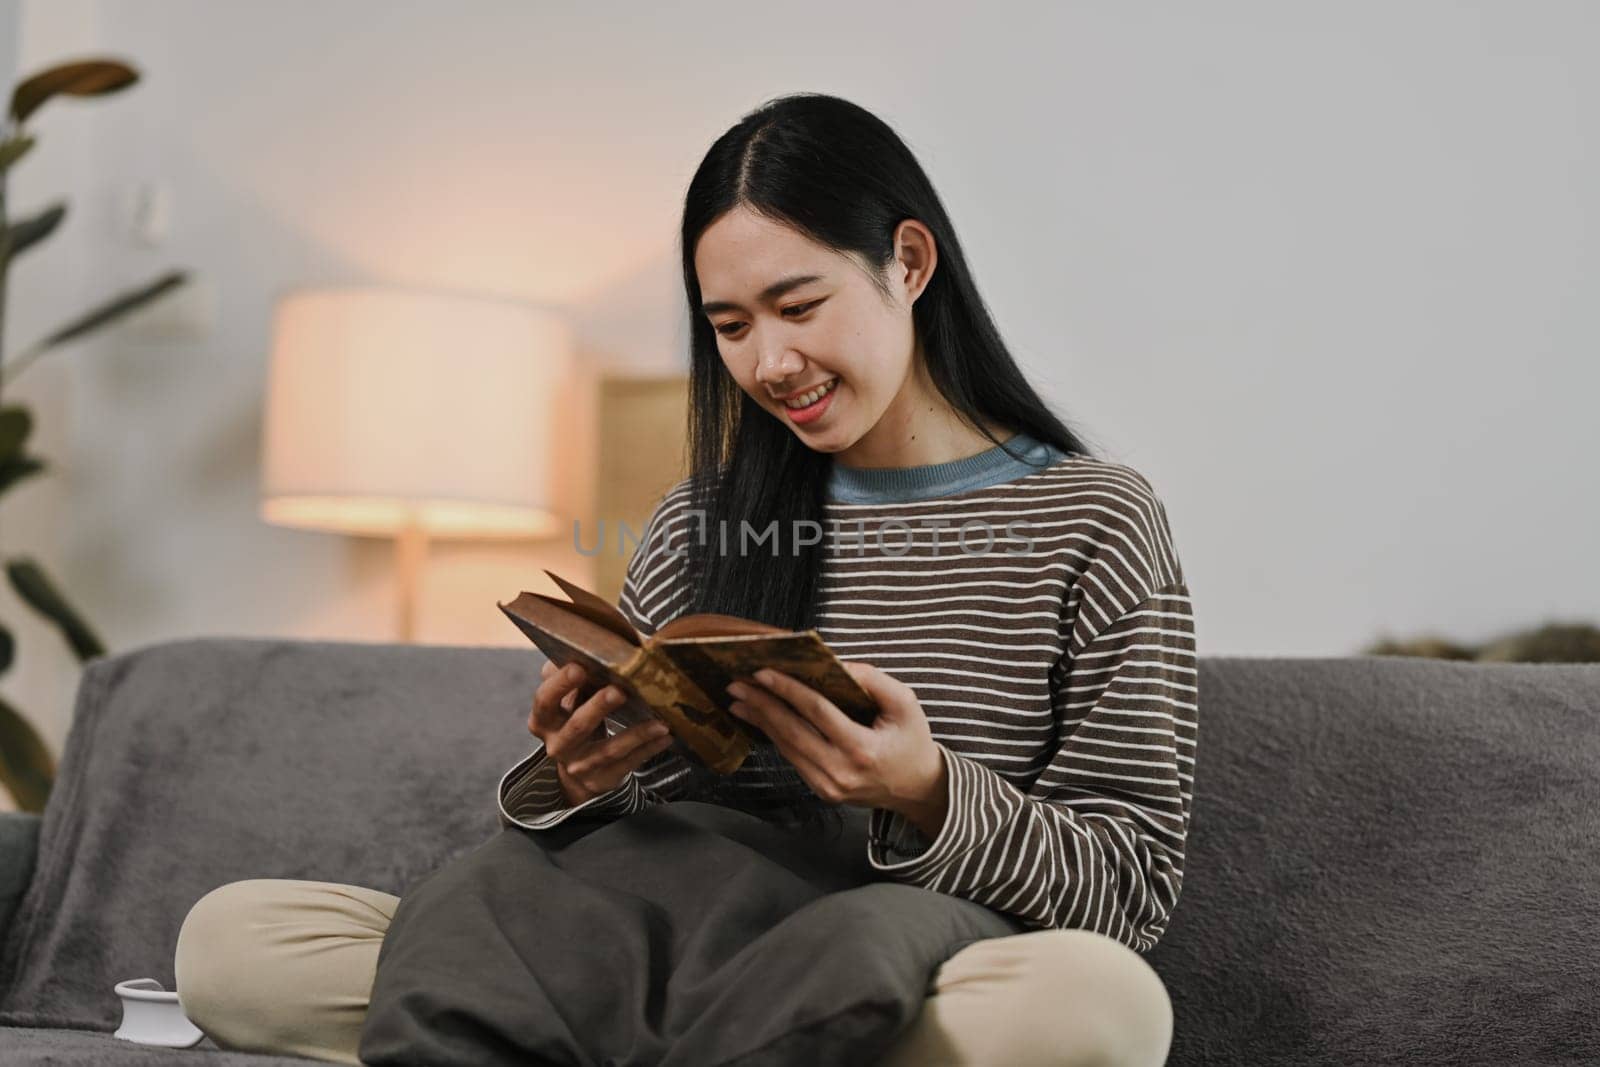 Beautiful young woman sitting on cozy sofa and reading book. People, leisure and lifestyle concept.